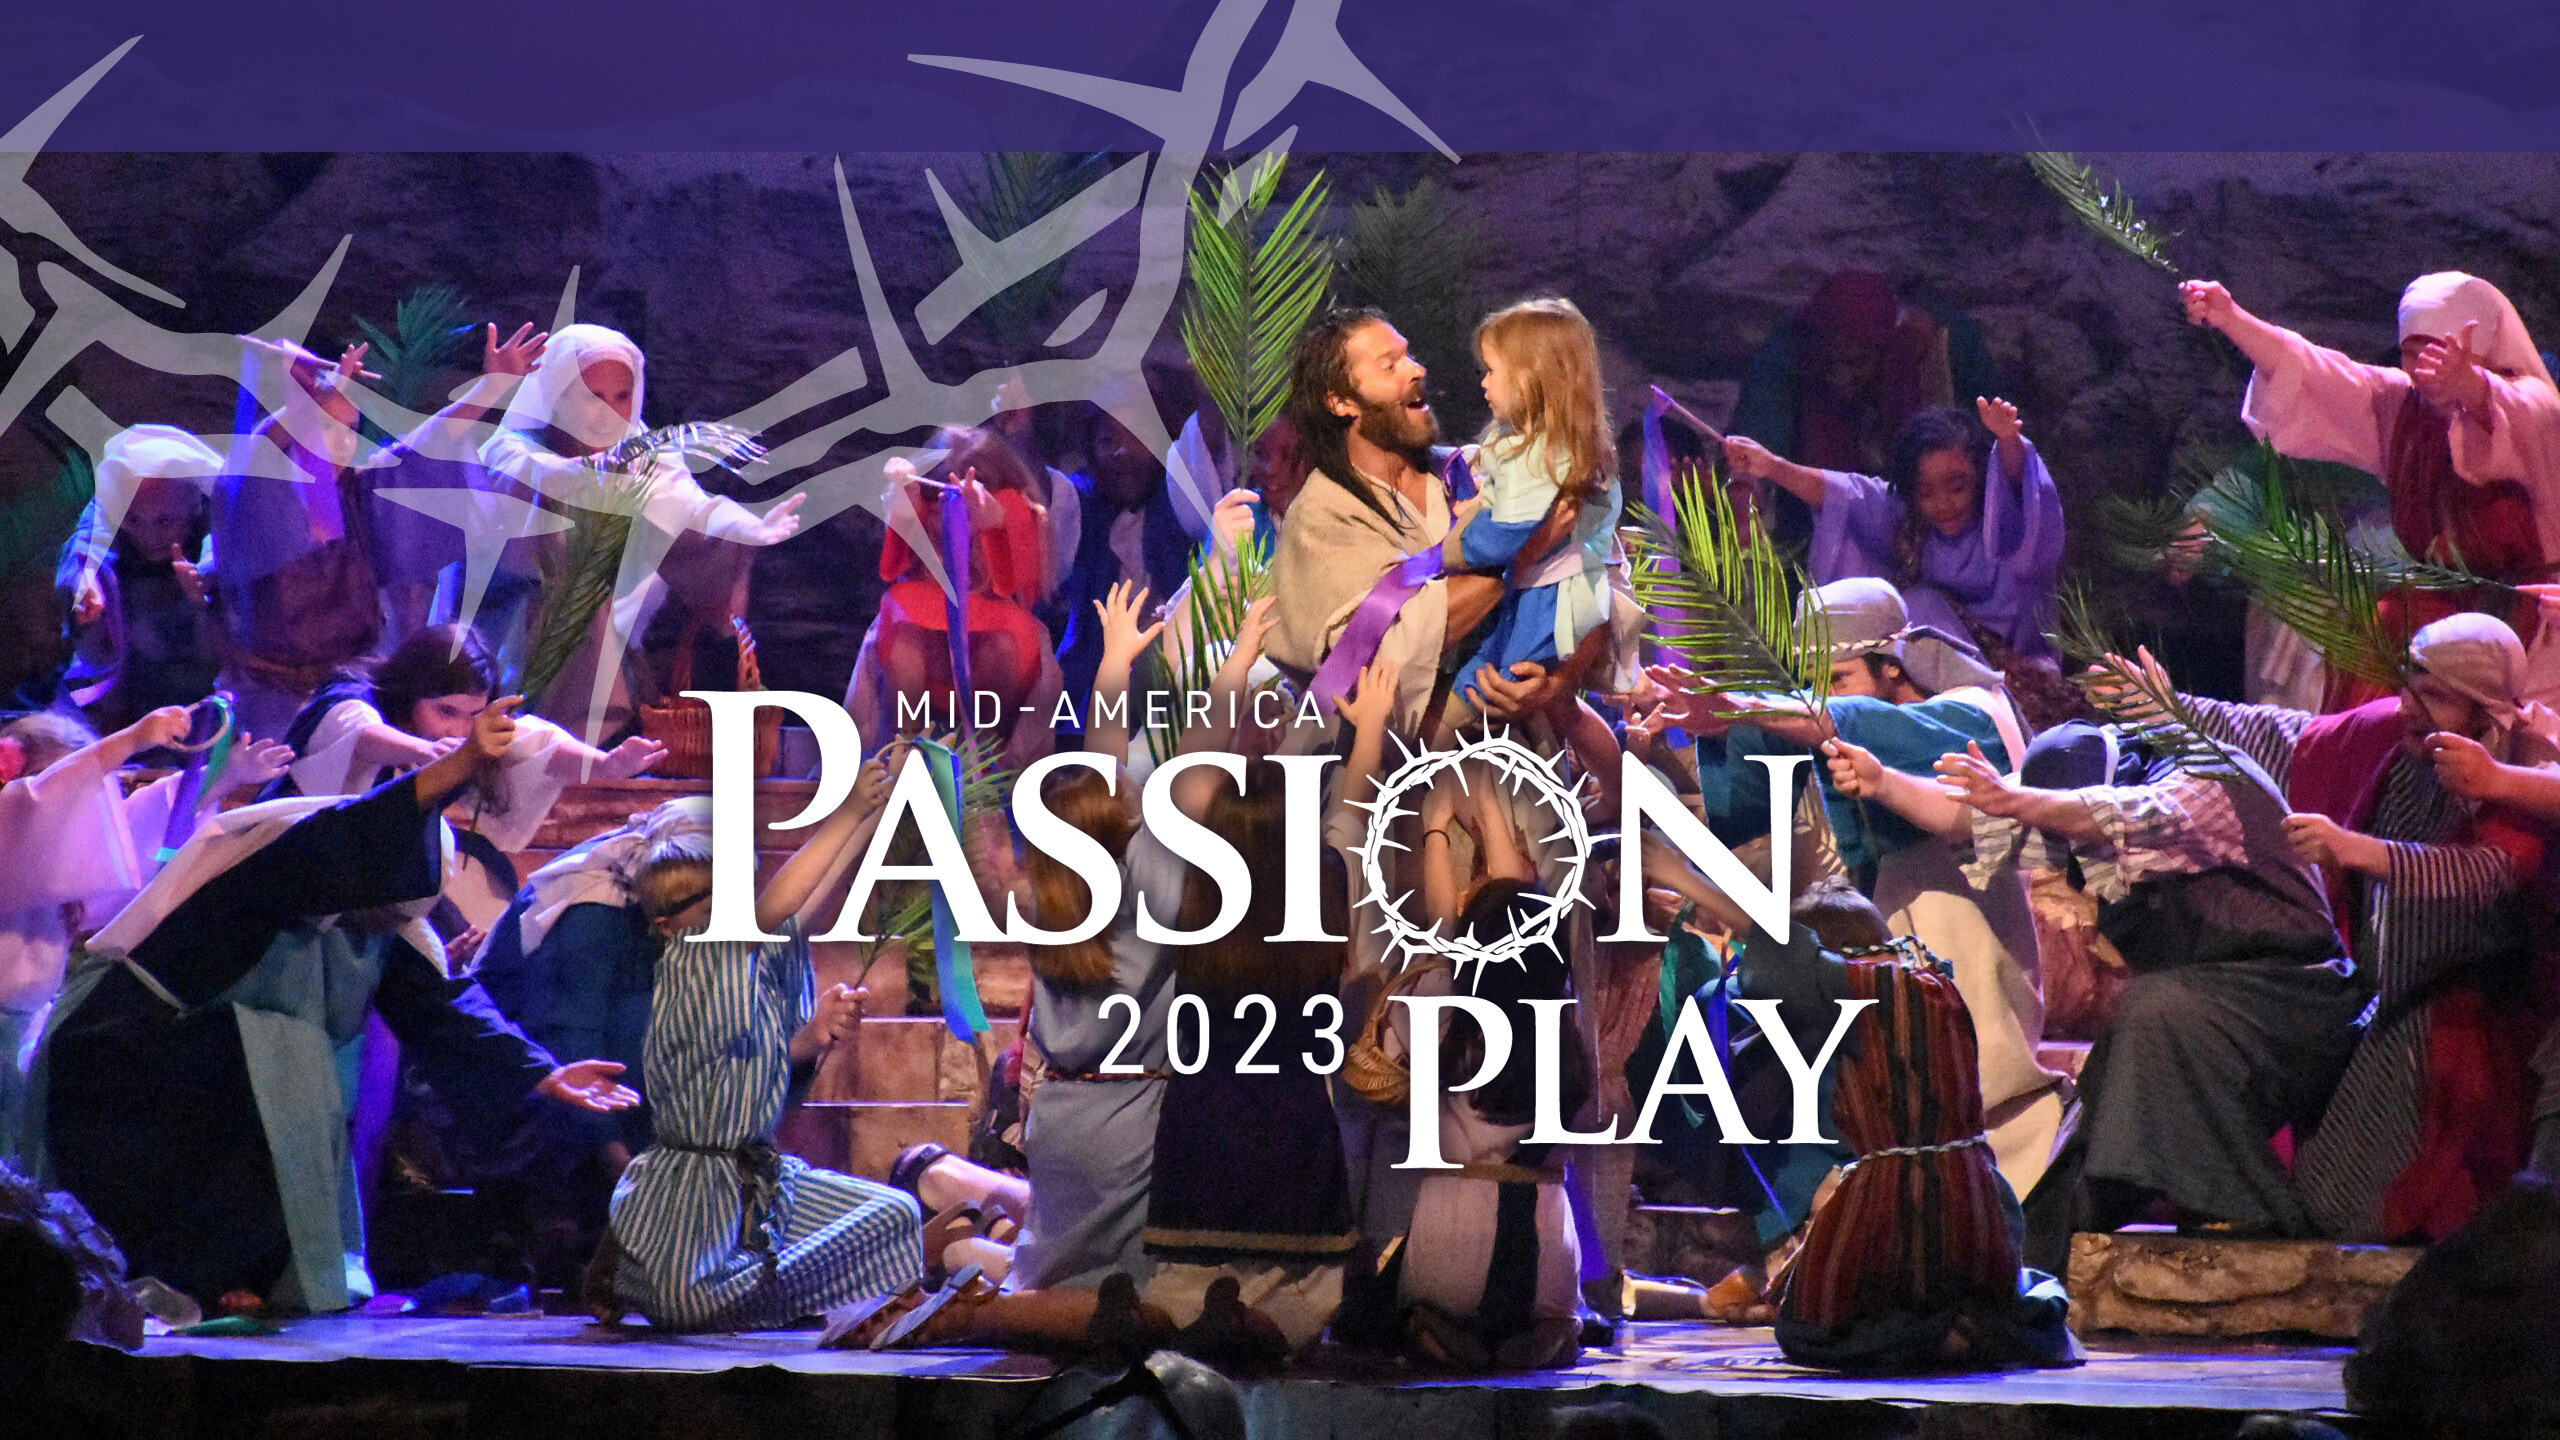 Mid-America Passion Play 2023